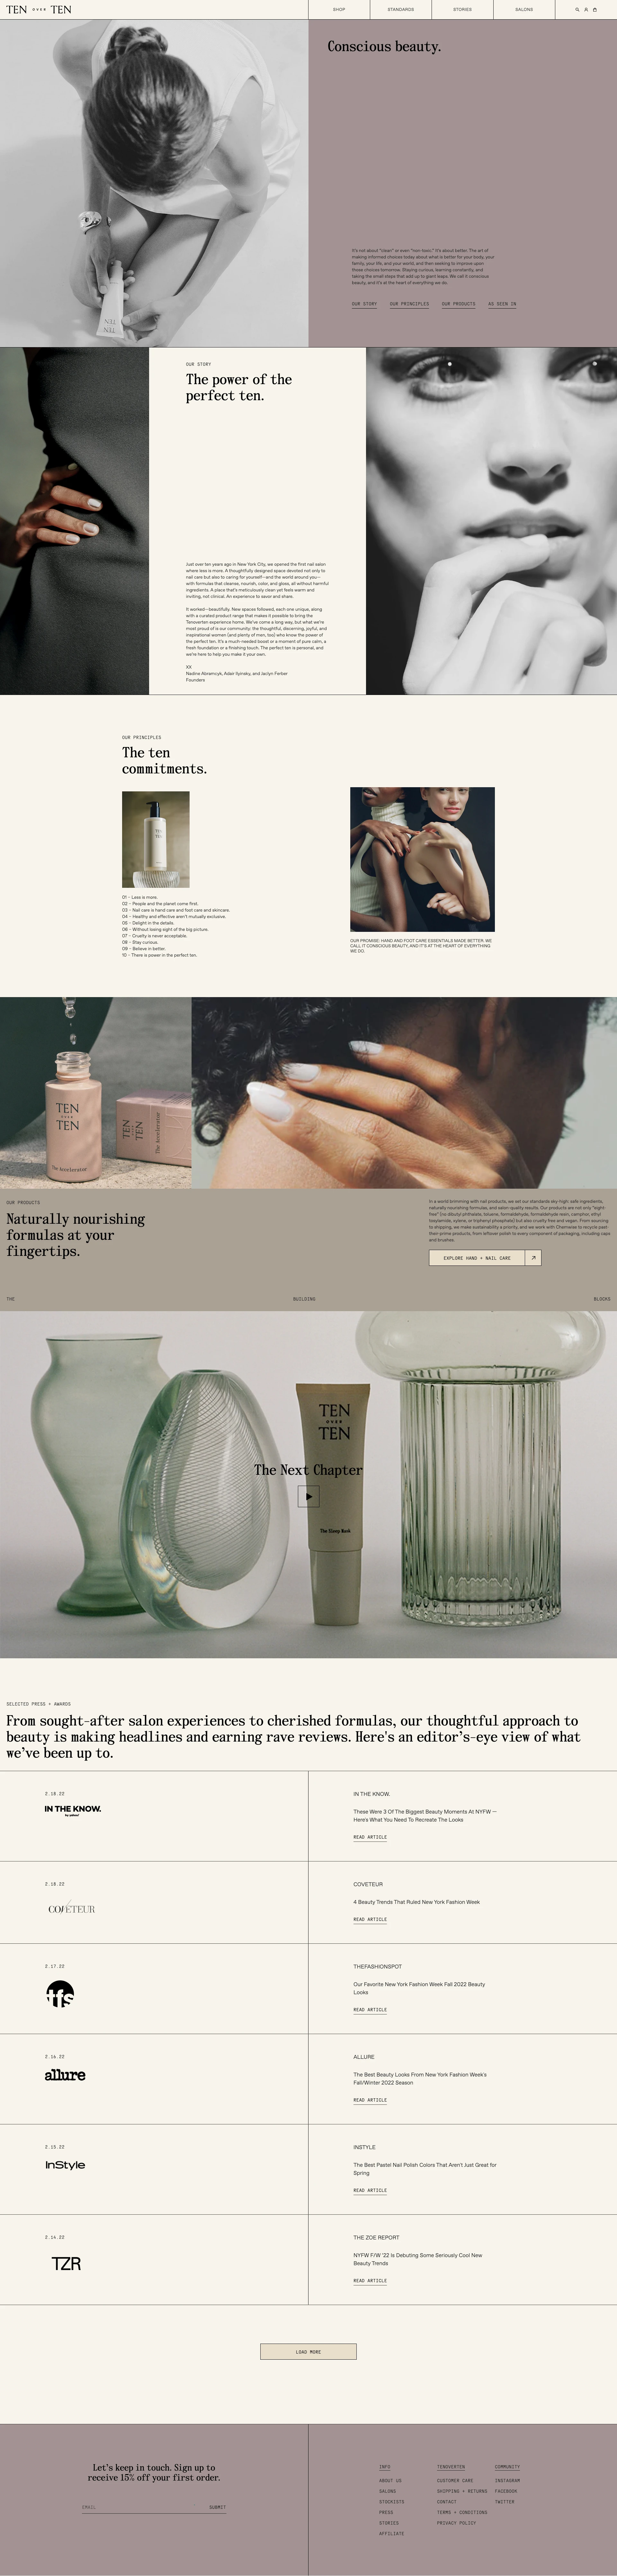 TenoverTen Landing Page Example: Hand, foot, and nail care essentials made better. Our products are not only 8-free, but also cruelty free and vegan. Shop non-toxic nail color and clean skincare from TenoverTen.